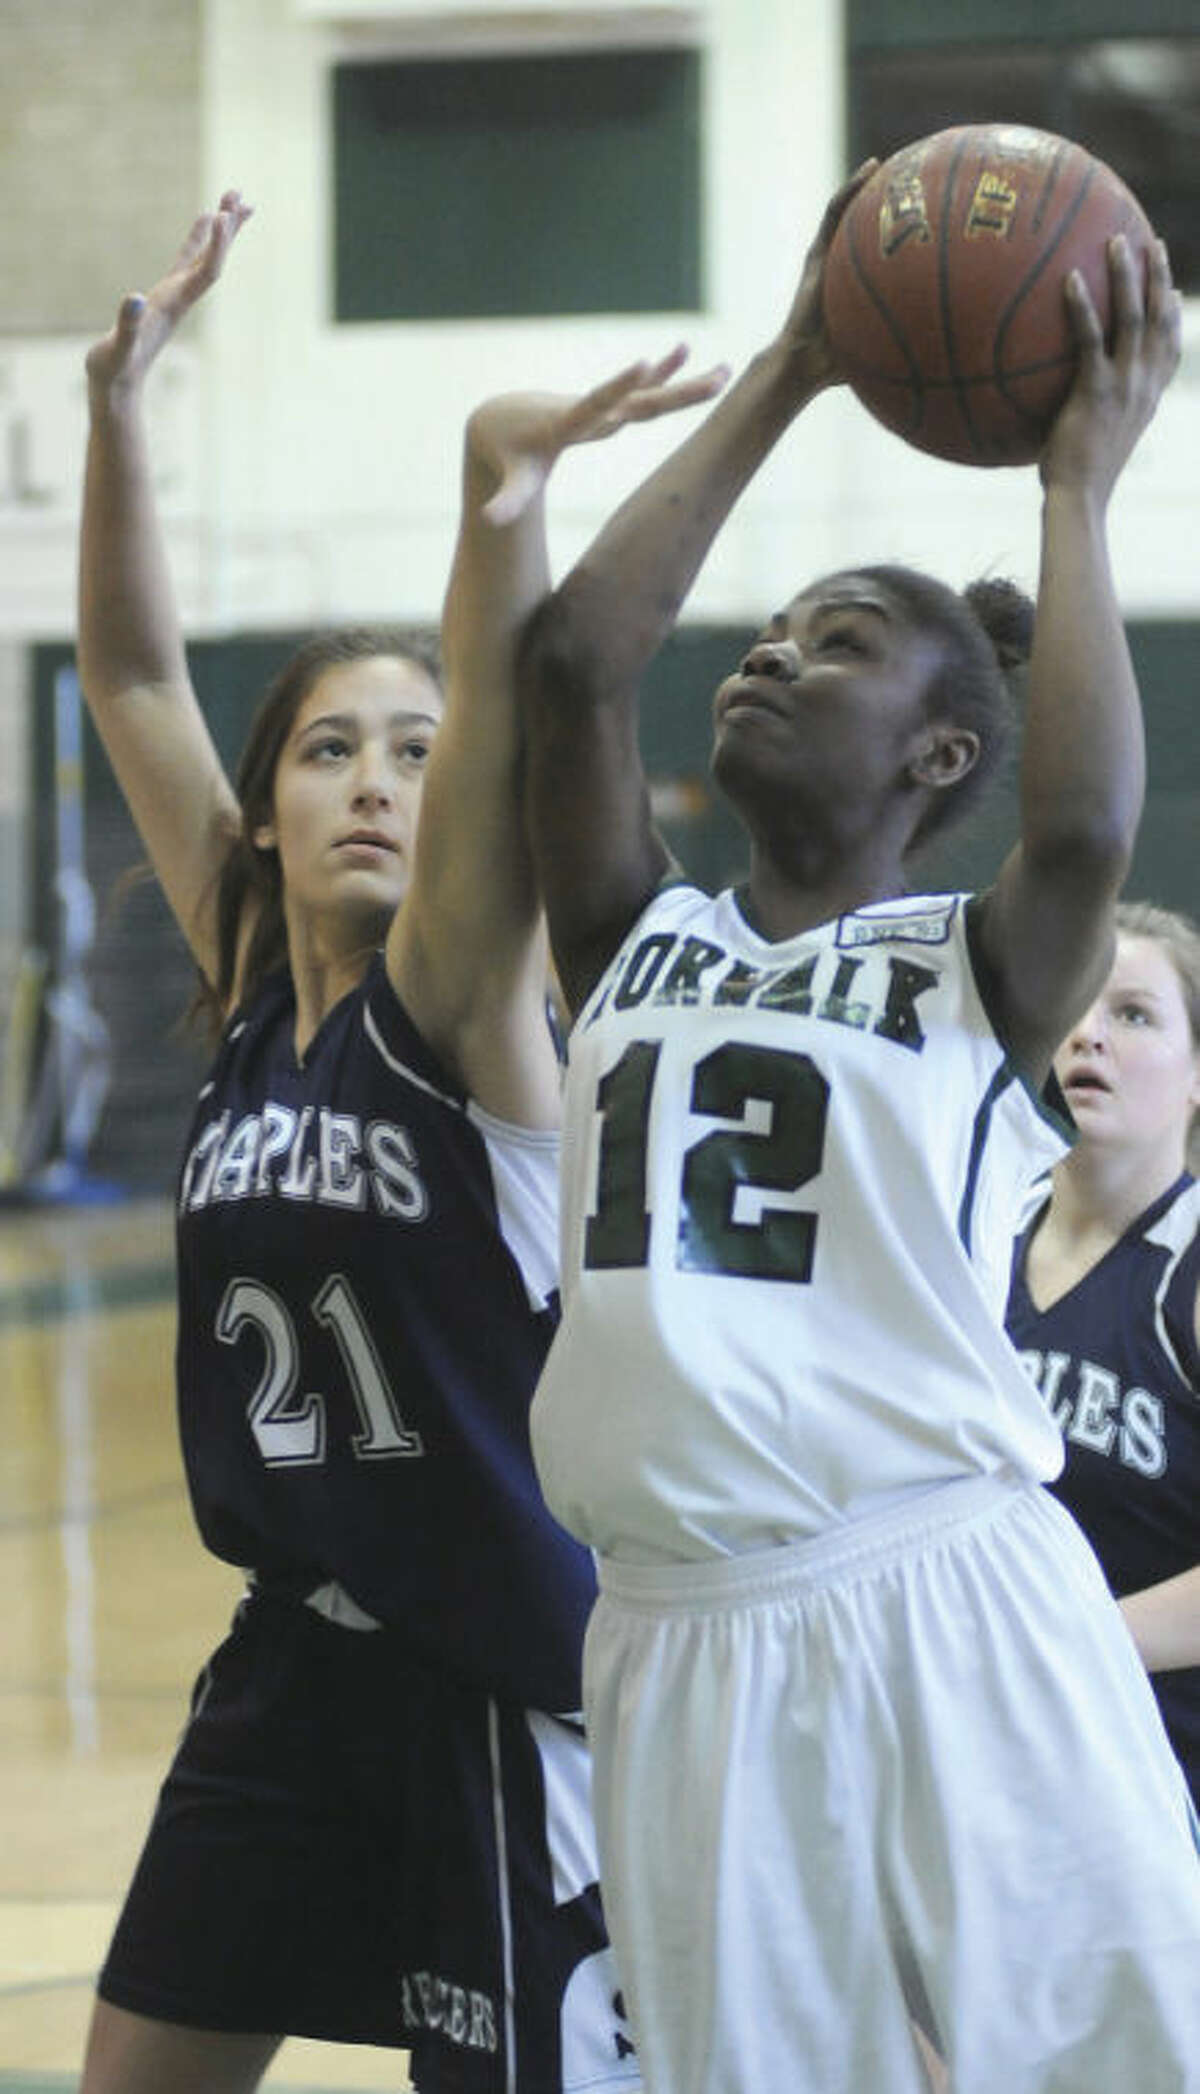 Hour photo/John Nash Norwalk's Asiah Knight (12) powers up to the basket against the defense of Staples' Julie Bartimer during Monday's FCIAC girls basketball game at Norwalk.